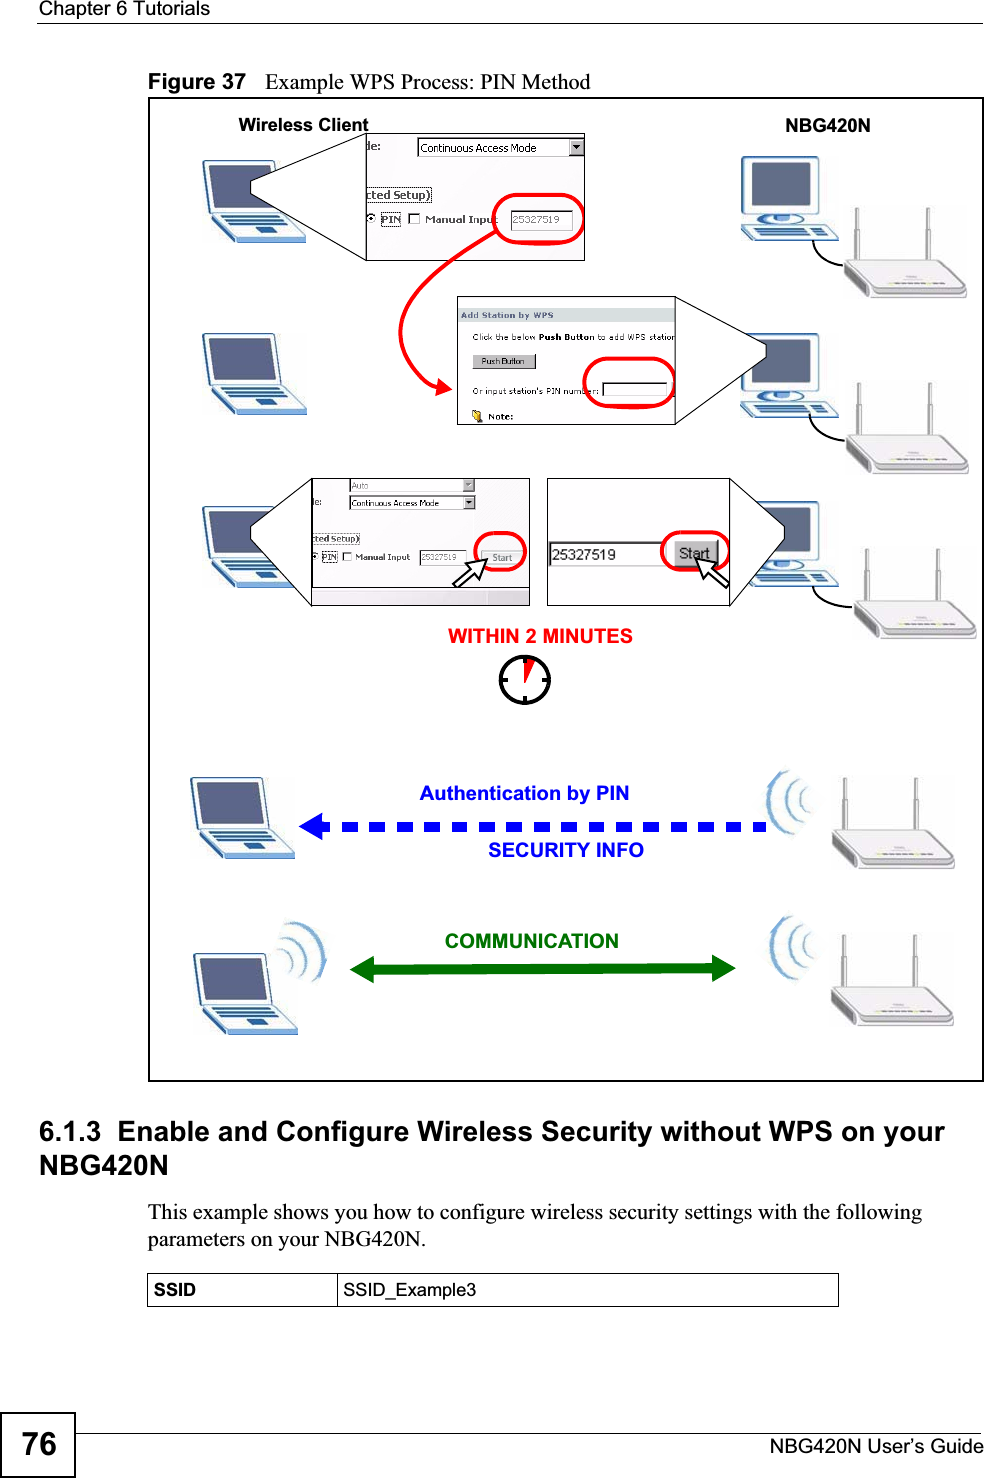 Chapter 6 TutorialsNBG420N User’s Guide76Figure 37   Example WPS Process: PIN Method6.1.3  Enable and Configure Wireless Security without WPS on your NBG420NThis example shows you how to configure wireless security settings with the following parameters on your NBG420N.Authentication by PINSECURITY INFOWITHIN 2 MINUTESWireless ClientNBG420NCOMMUNICATIONSSID SSID_Example3